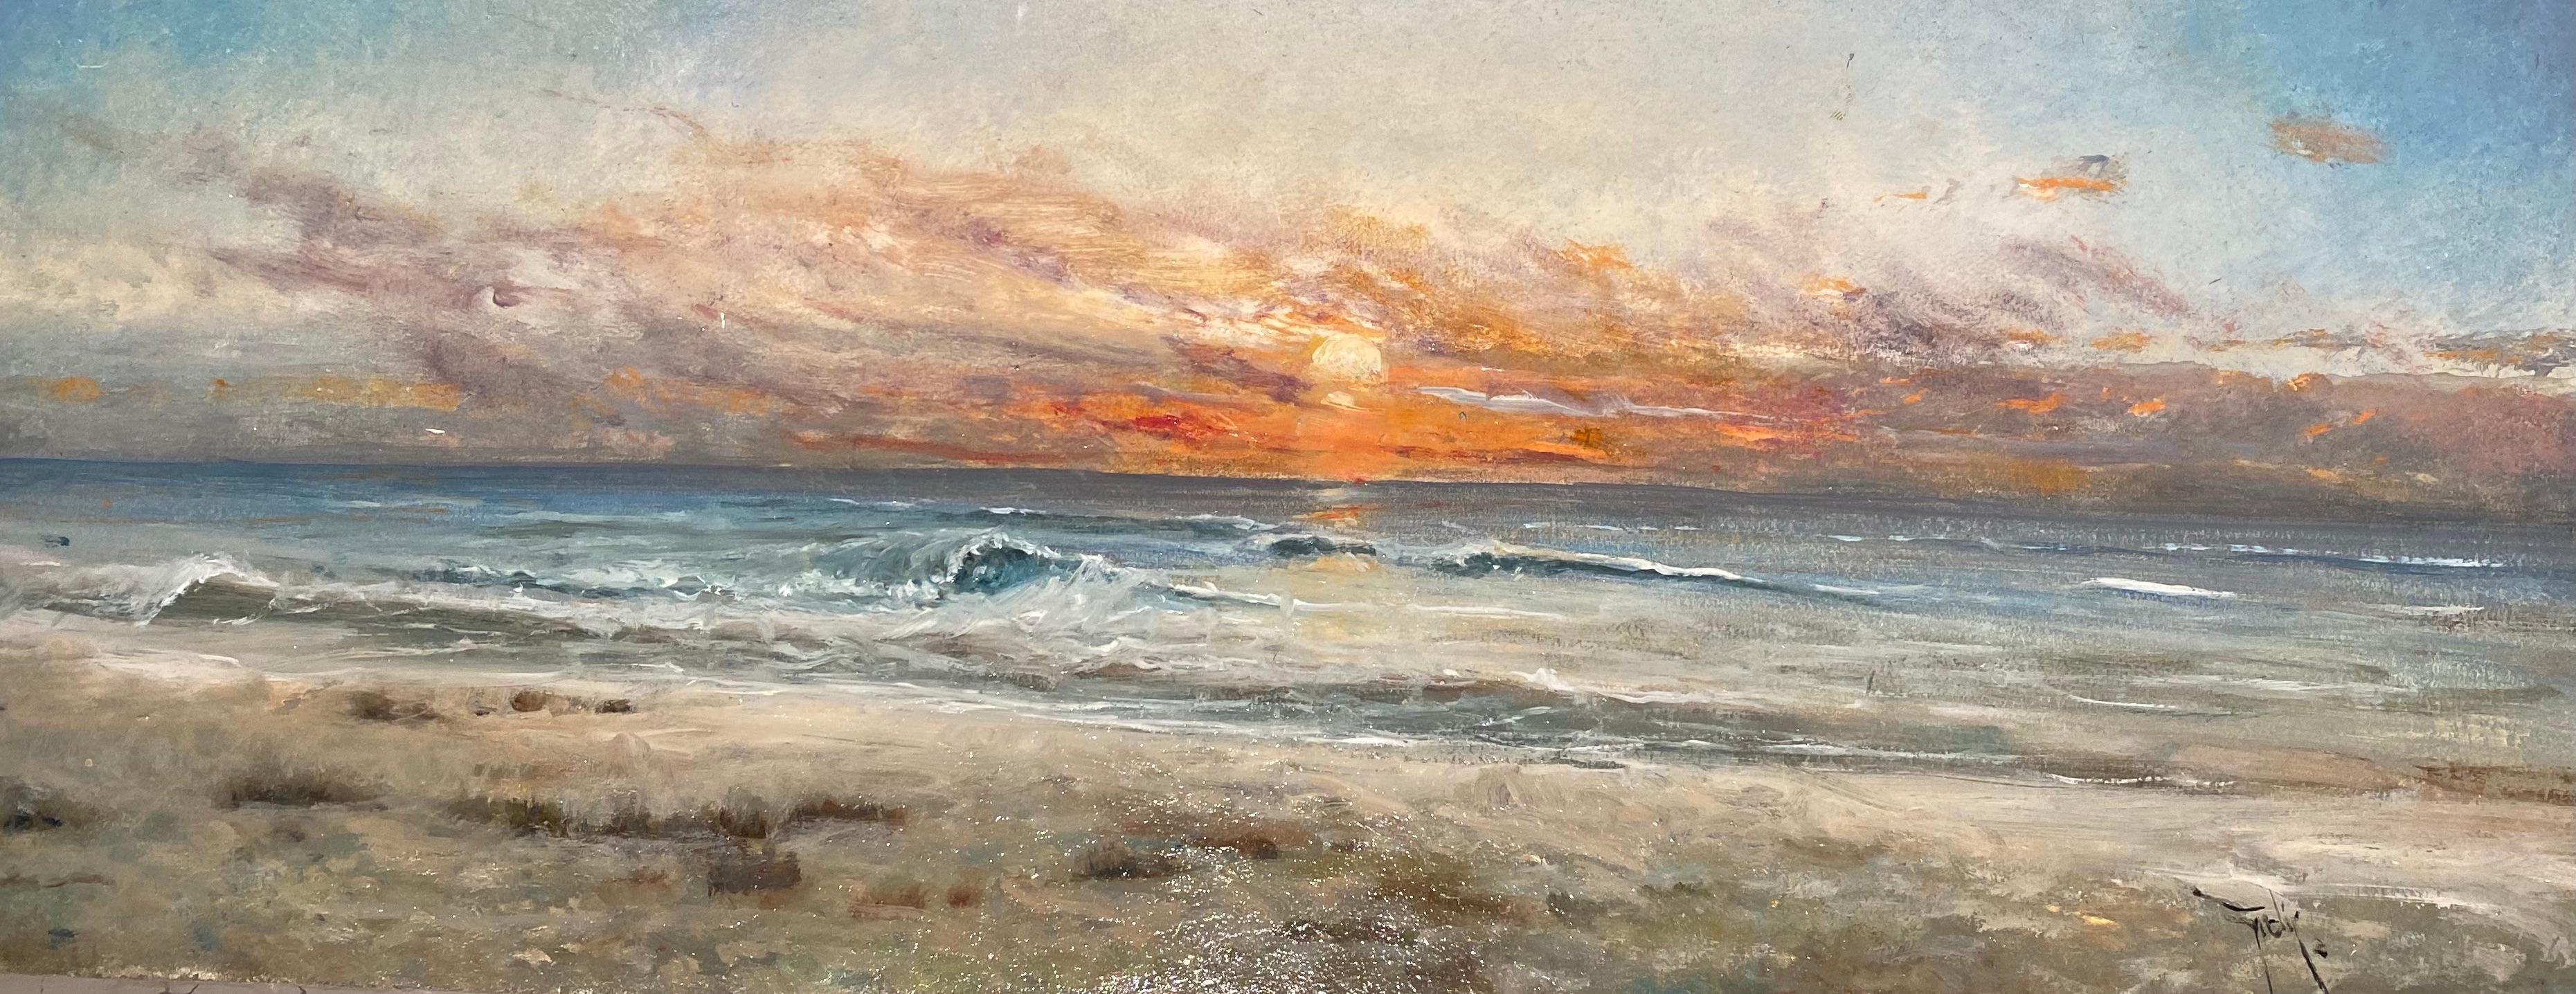 Ignacio Trelis  Landscape Painting - 'Sunset Beach' Contemporary Seascape painting of the waves, sand and setting sun